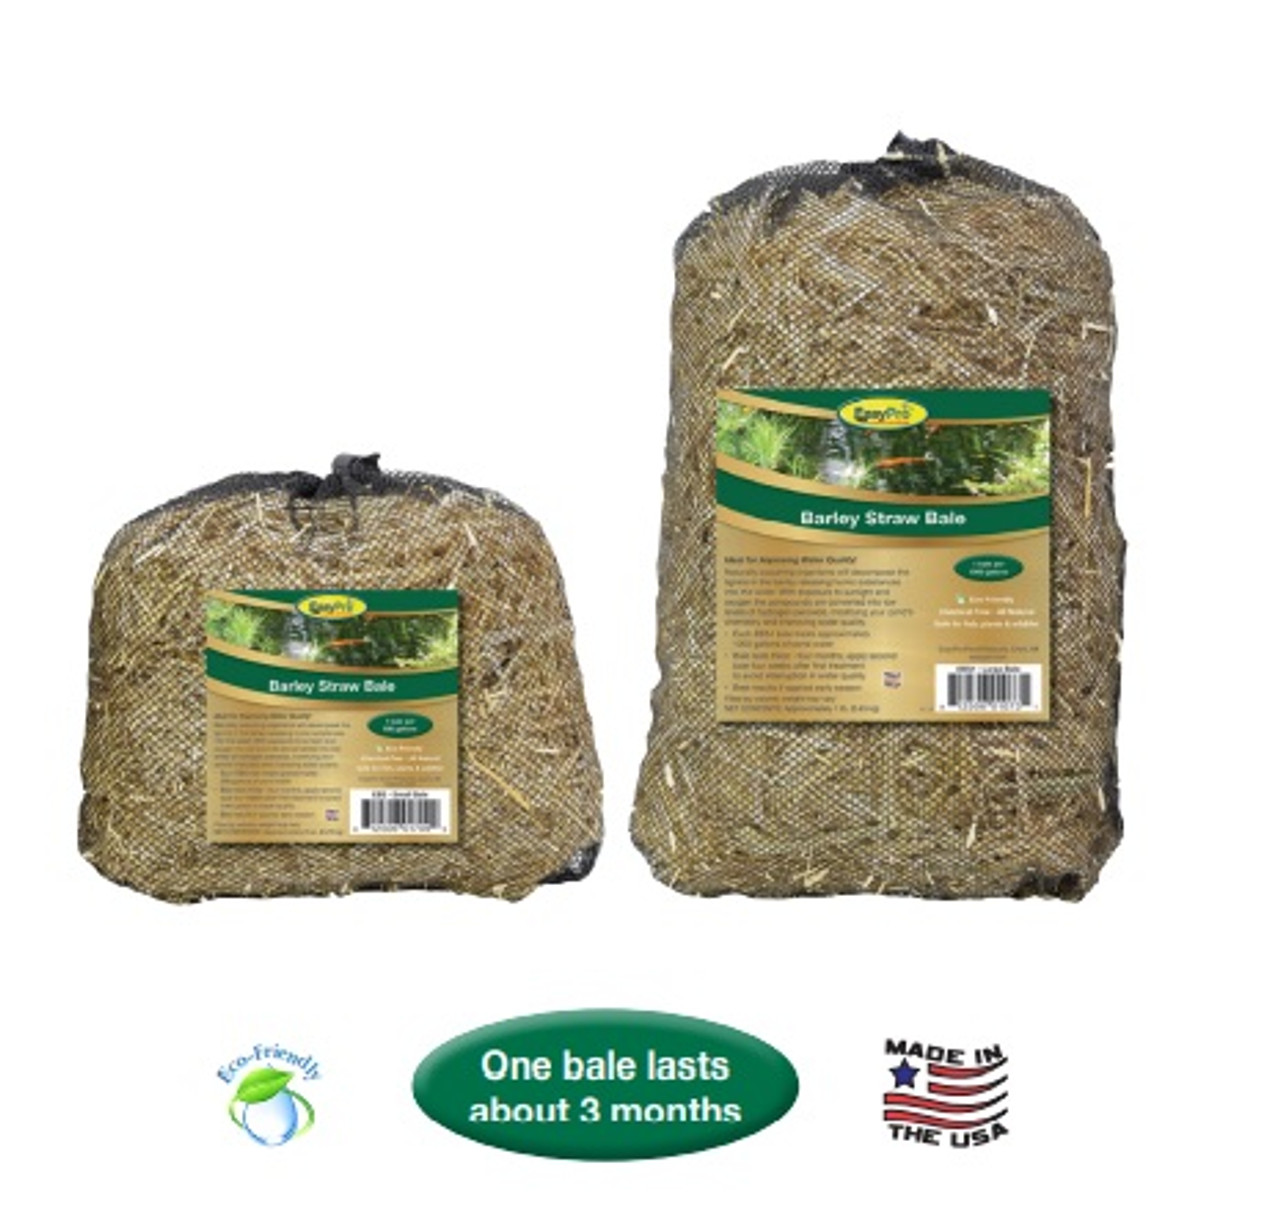 EasyPro Barley Straw Bale - 1 lb. (up to 1000 gallon pond)